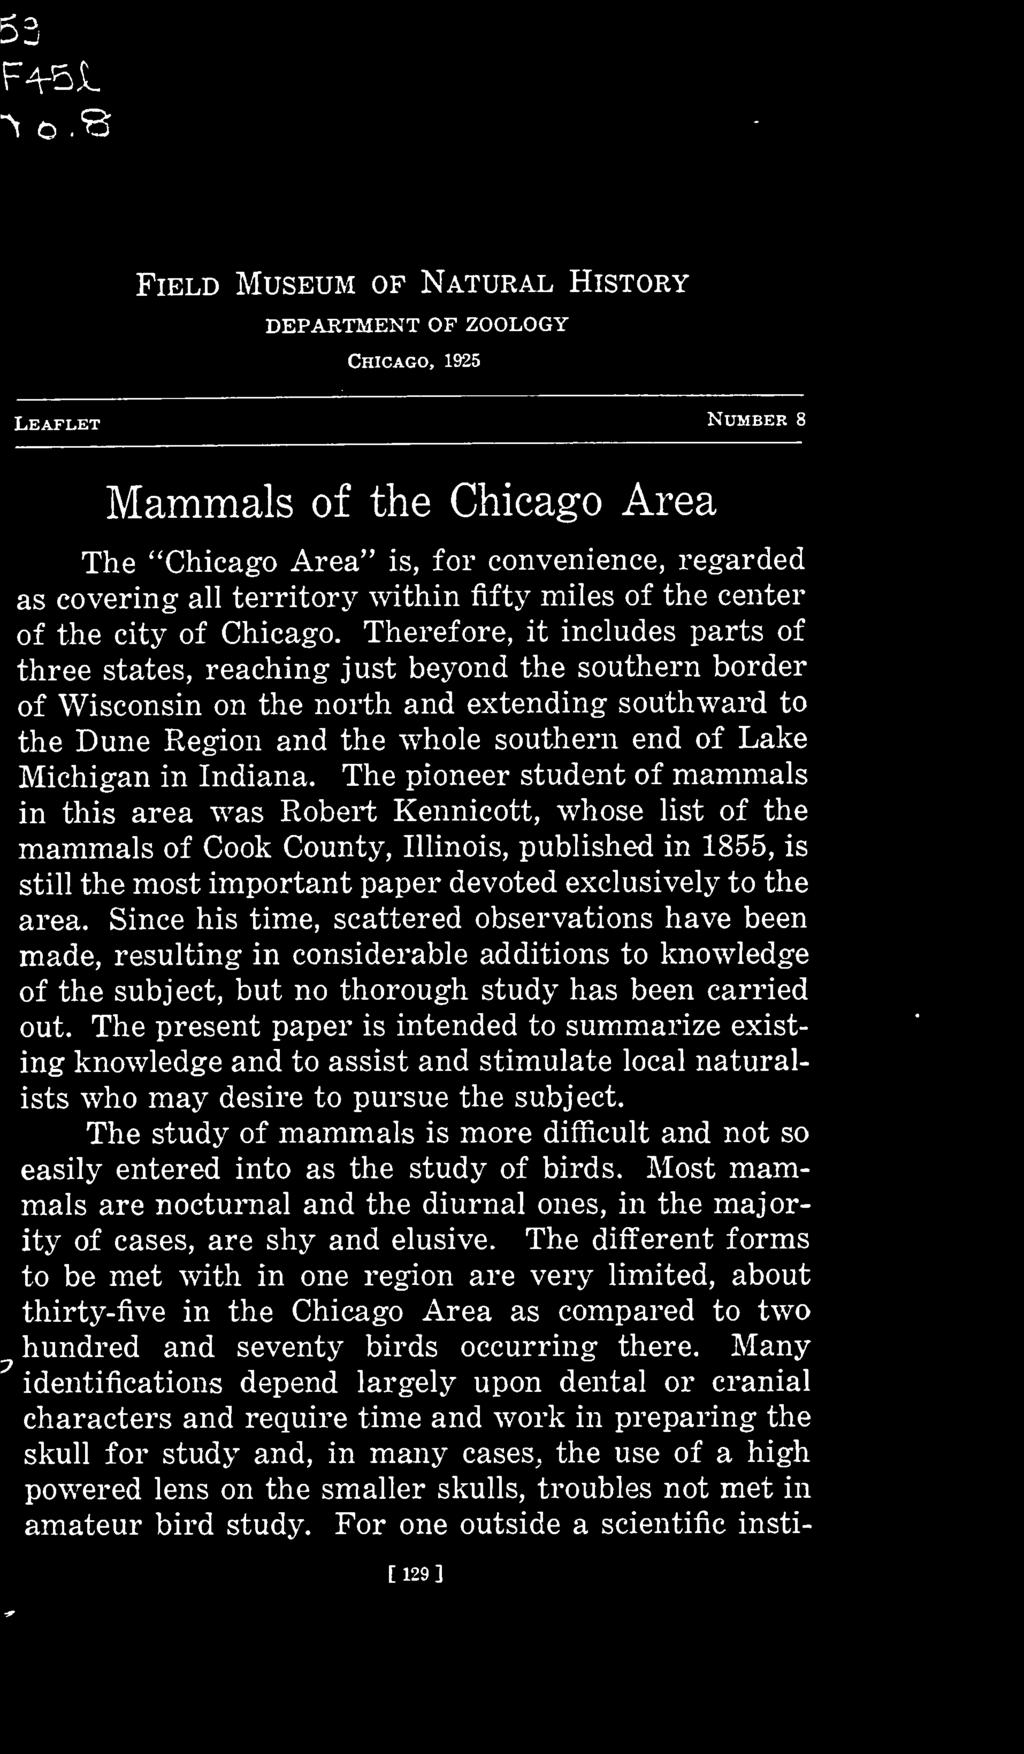 530 Field Museum of Natural History DEPARTMENT OF ZOOLOGY Chicago, 1925 Leaflet Number 8 Mammals of the Chicago Area The "Chicago Area" is, for convenience, regarded as covering all territory within